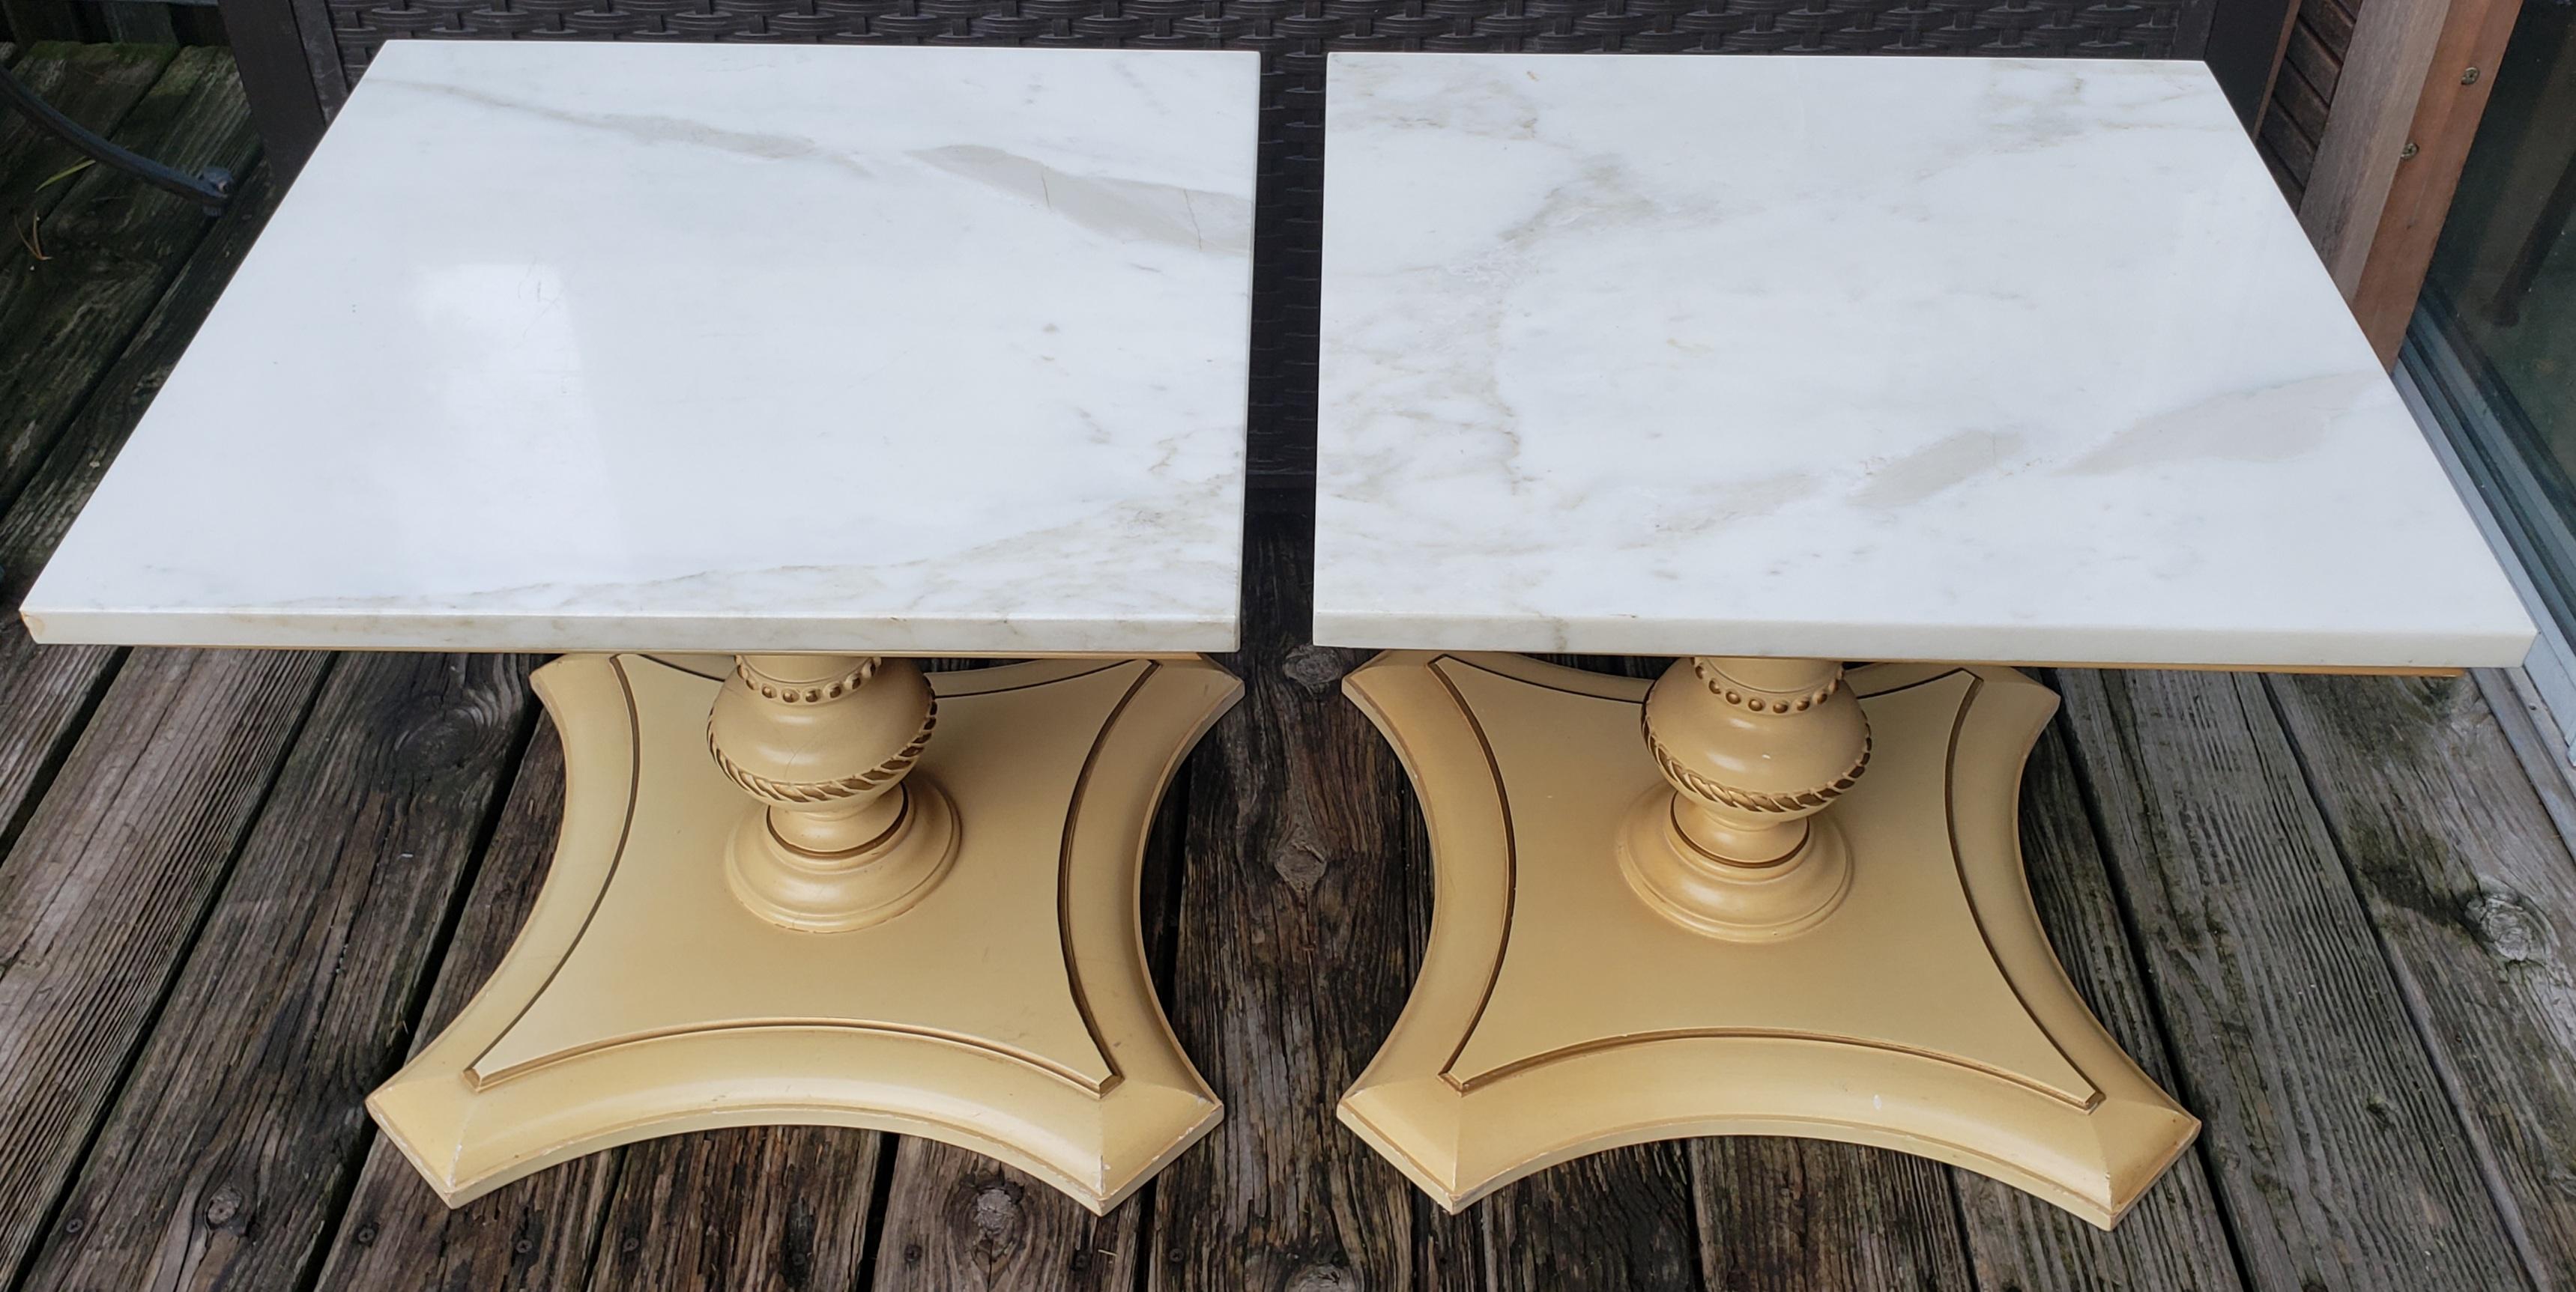 These tables they are absolutely beautiful. They date back to at least the 1950-60s

Solid polished antique white carrara marble with neoclassical square pedestal bases with stylish partial gilt lines.
The shape is very transitional as they are